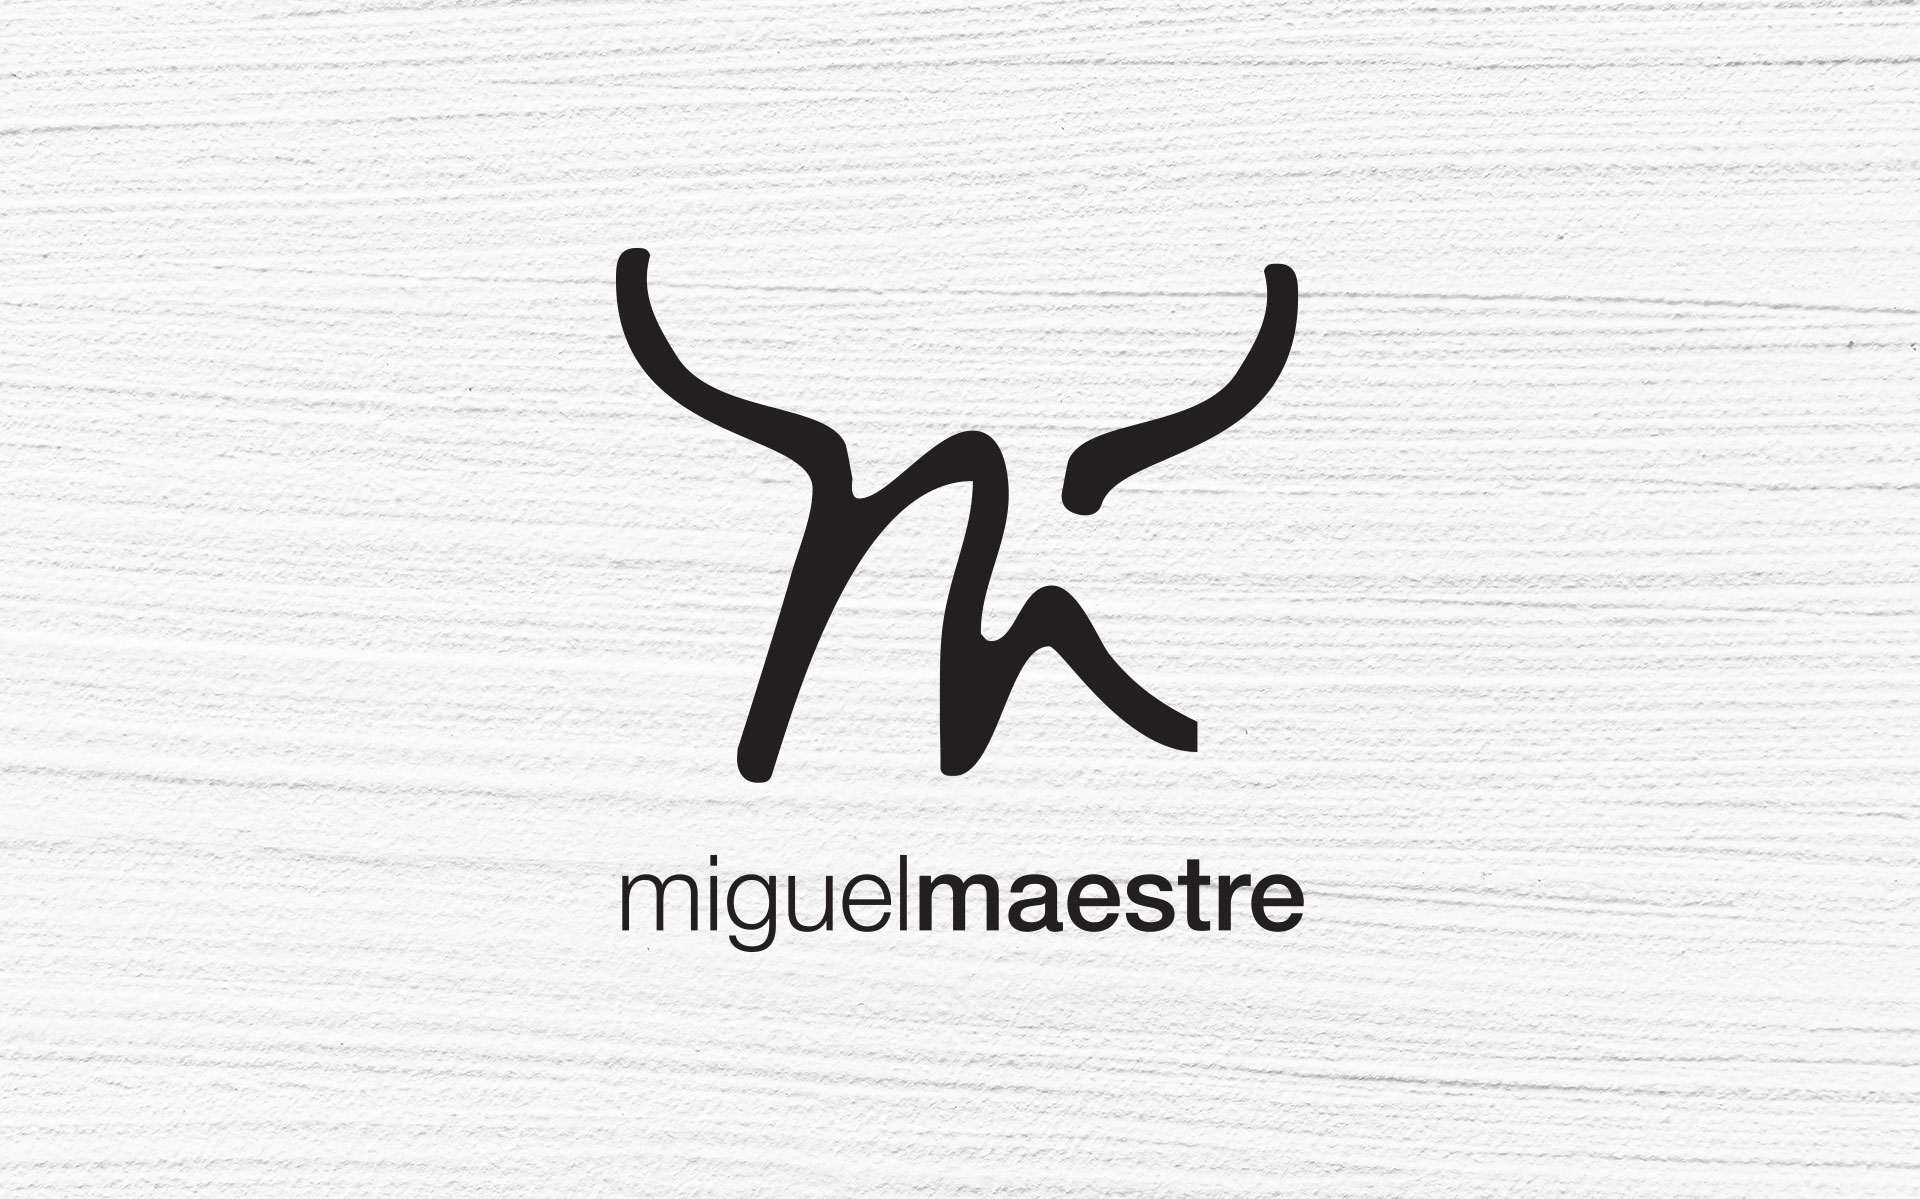 Miguel Maestre logo, branding, marketing & website design & build by Amy at Yellow Sunday